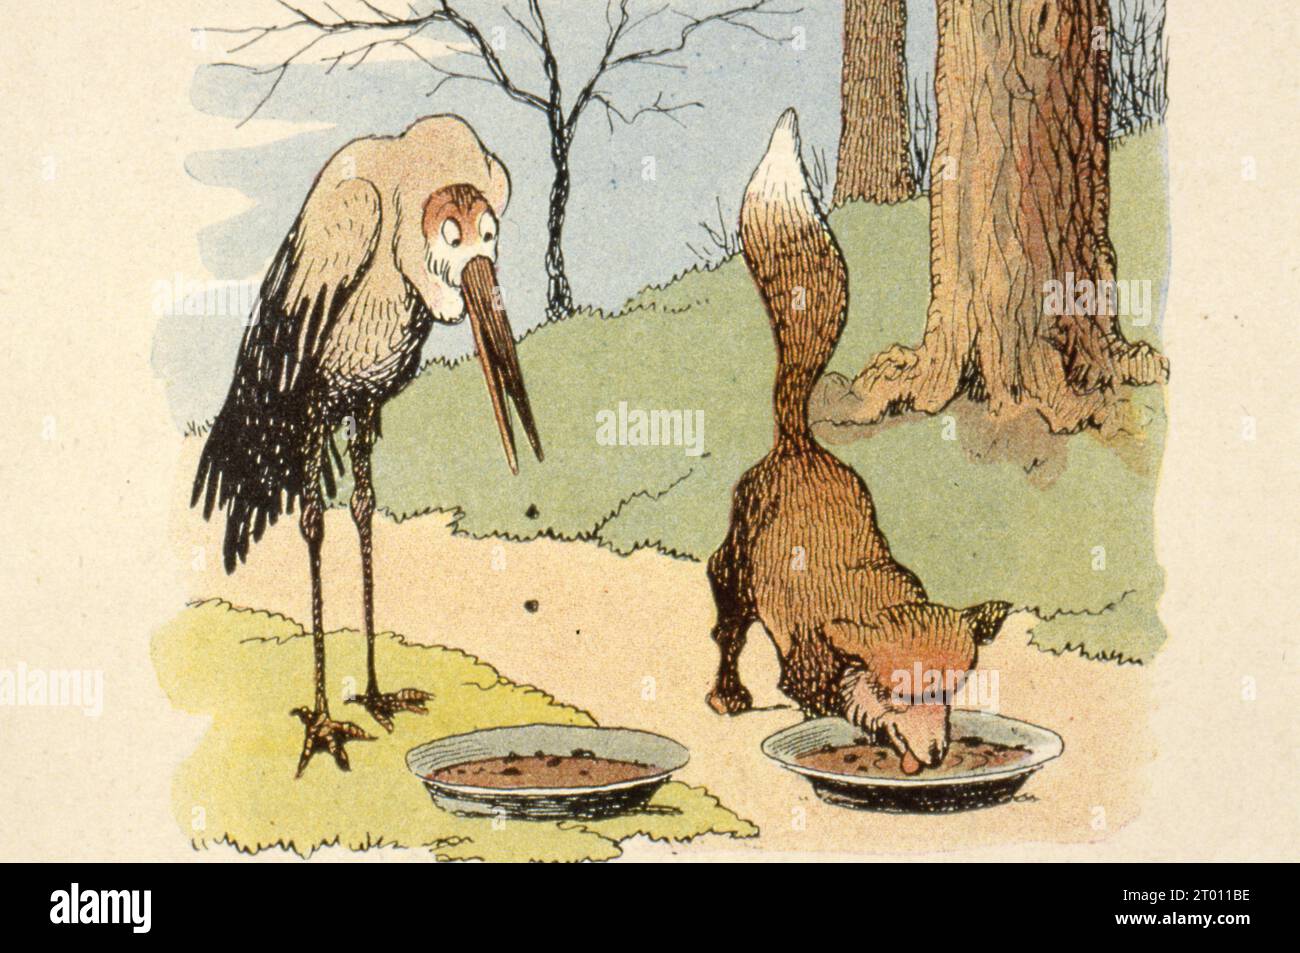 Benjamin Rabier Illustration of La Fontaine's Fables: The Fox and the Stork 1906 Private collection Stock Photo